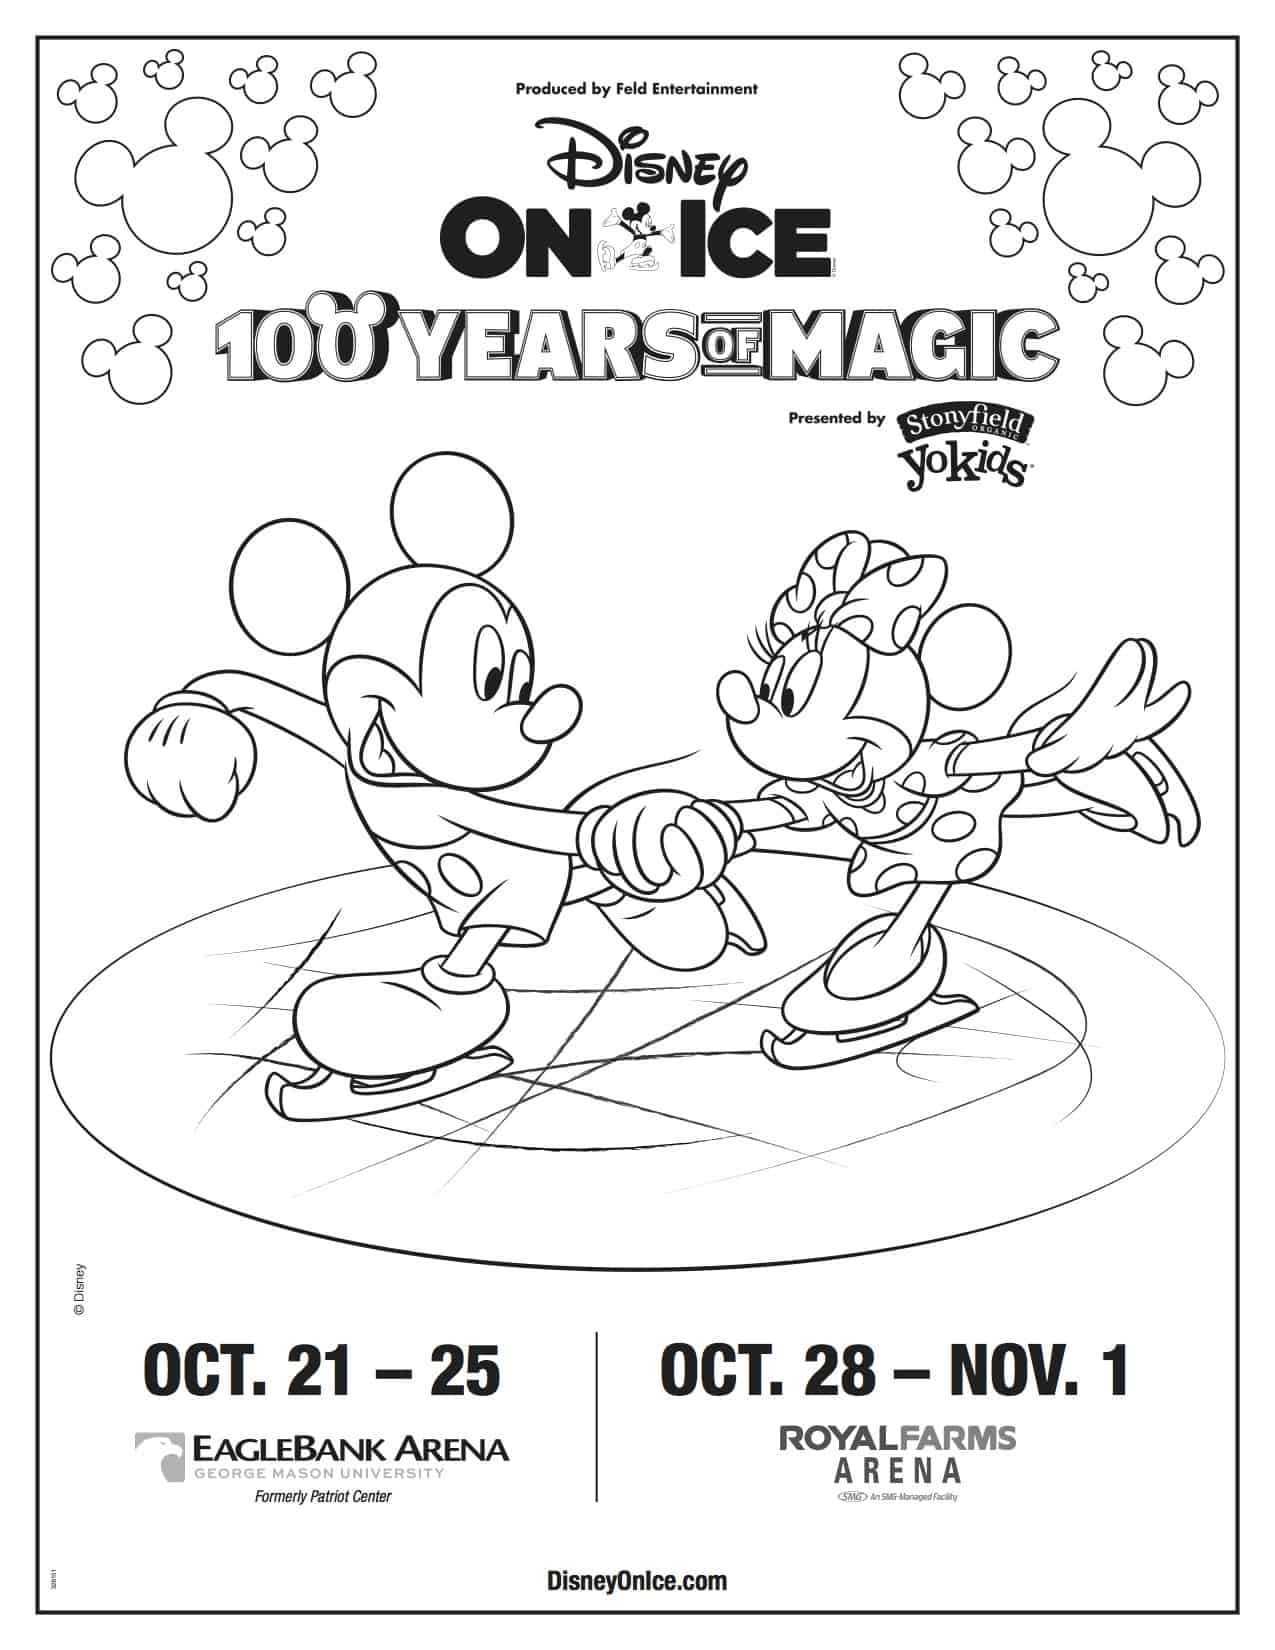 Disney On Ice 100 Years of Magic Fun! - With Ashley And Company